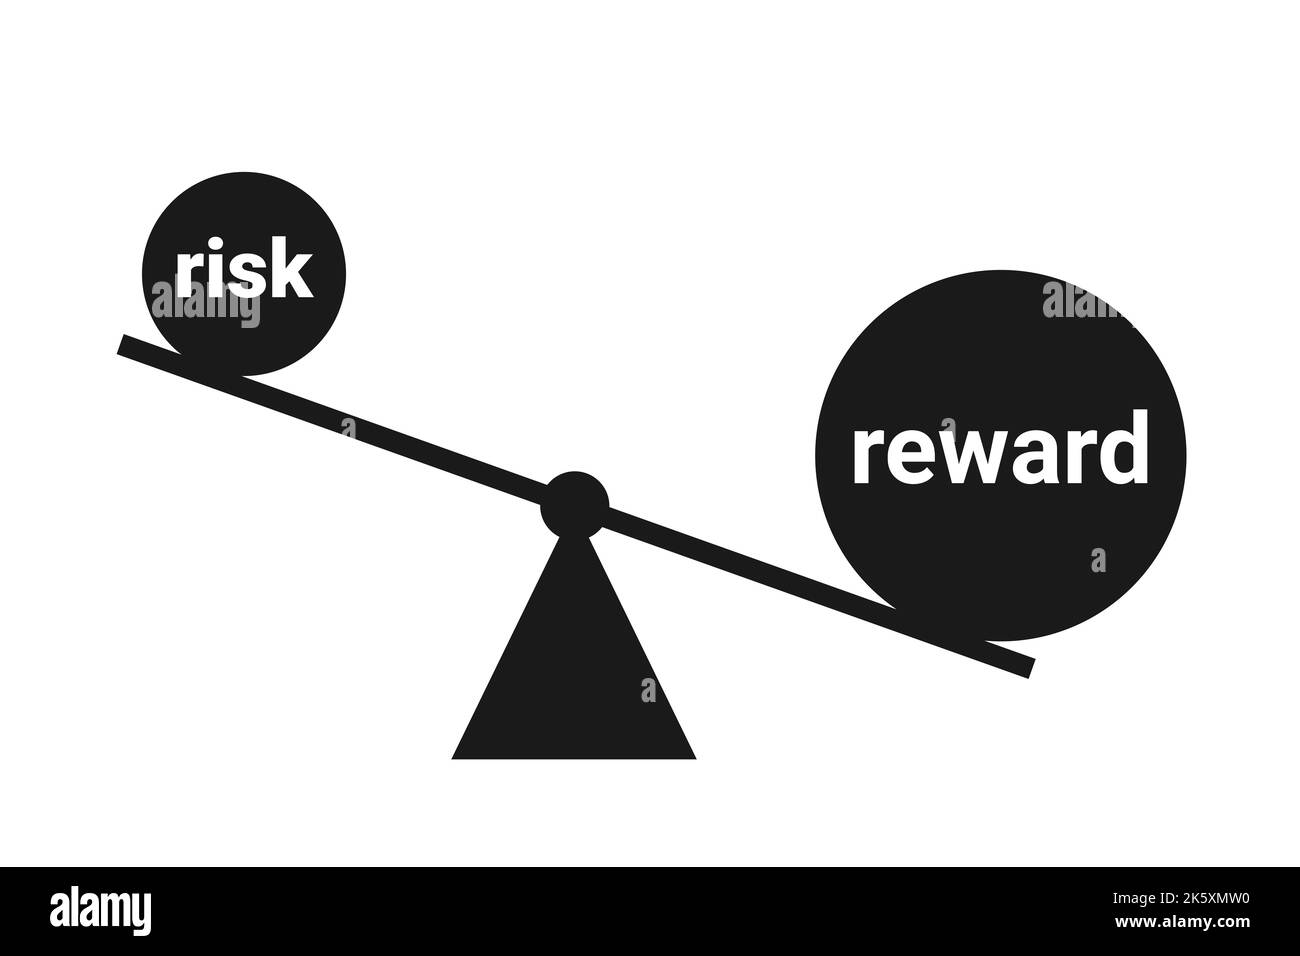 Risk and Reward ratio - balancing and comparison between risky hazardous hazard and profitable profit and gain. Vector illustration isolated on white. Stock Photo